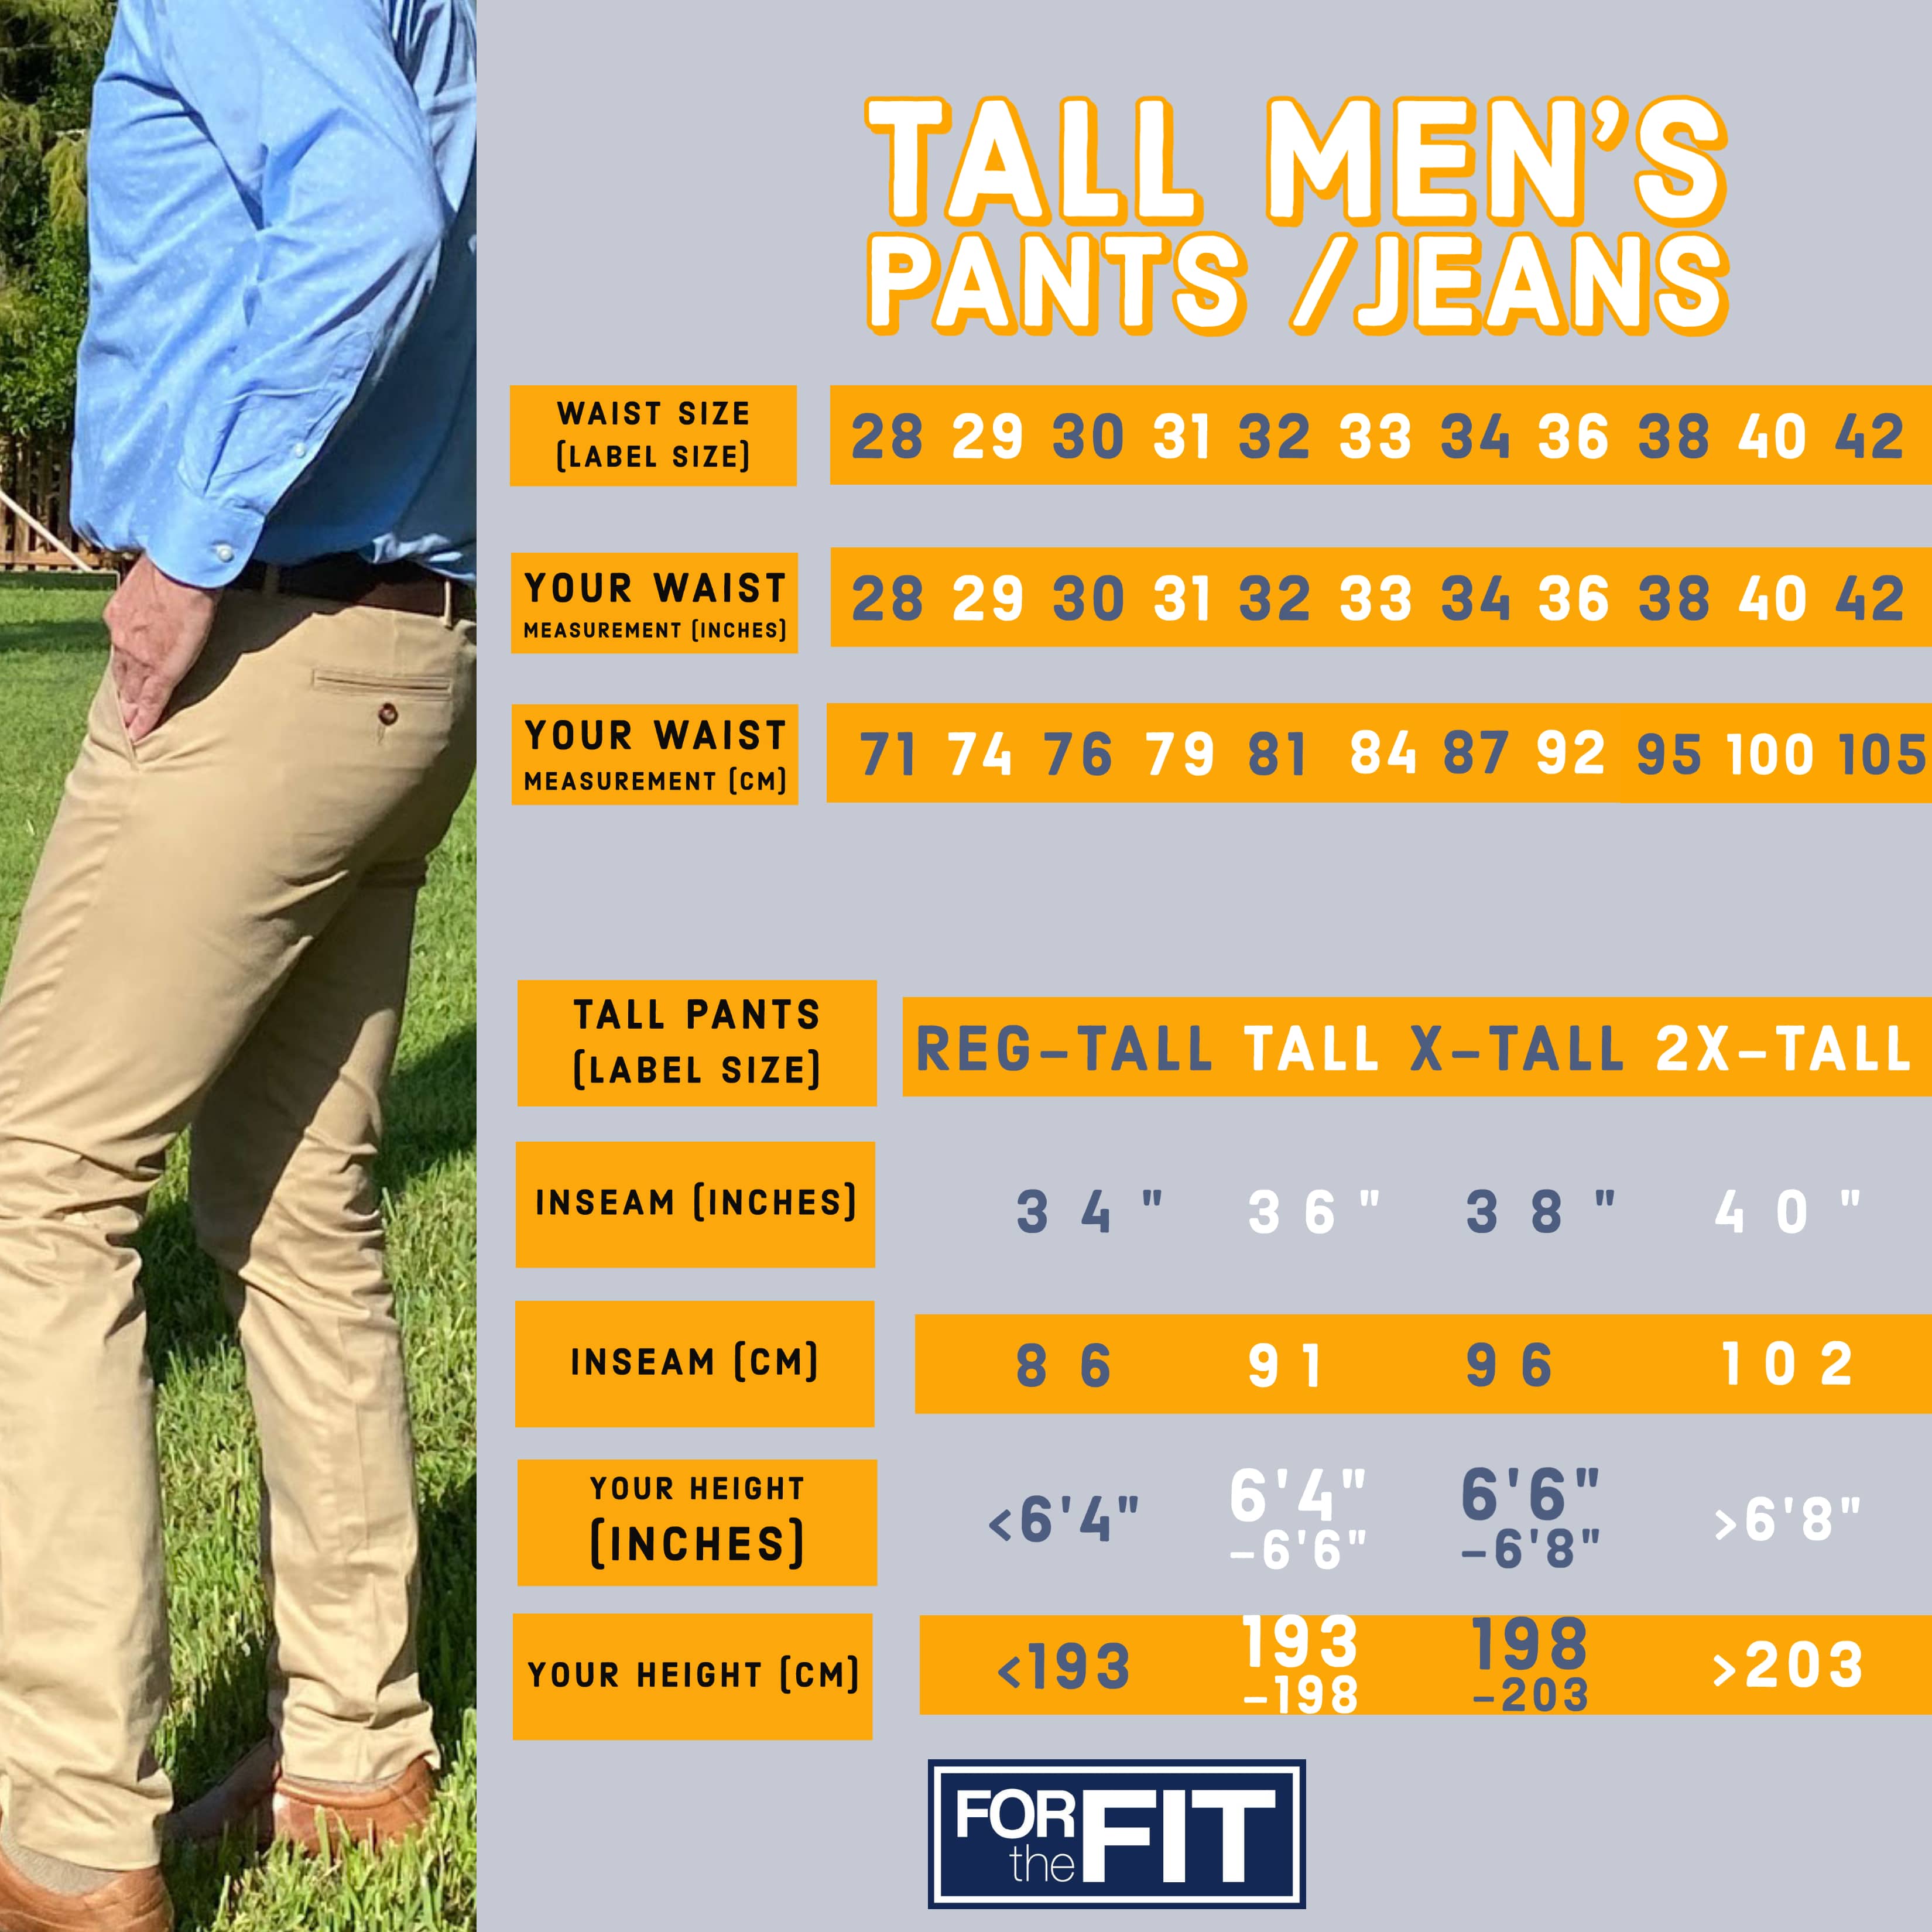 Pants Size Conversion Charts  Sizing Guides for Men  Women